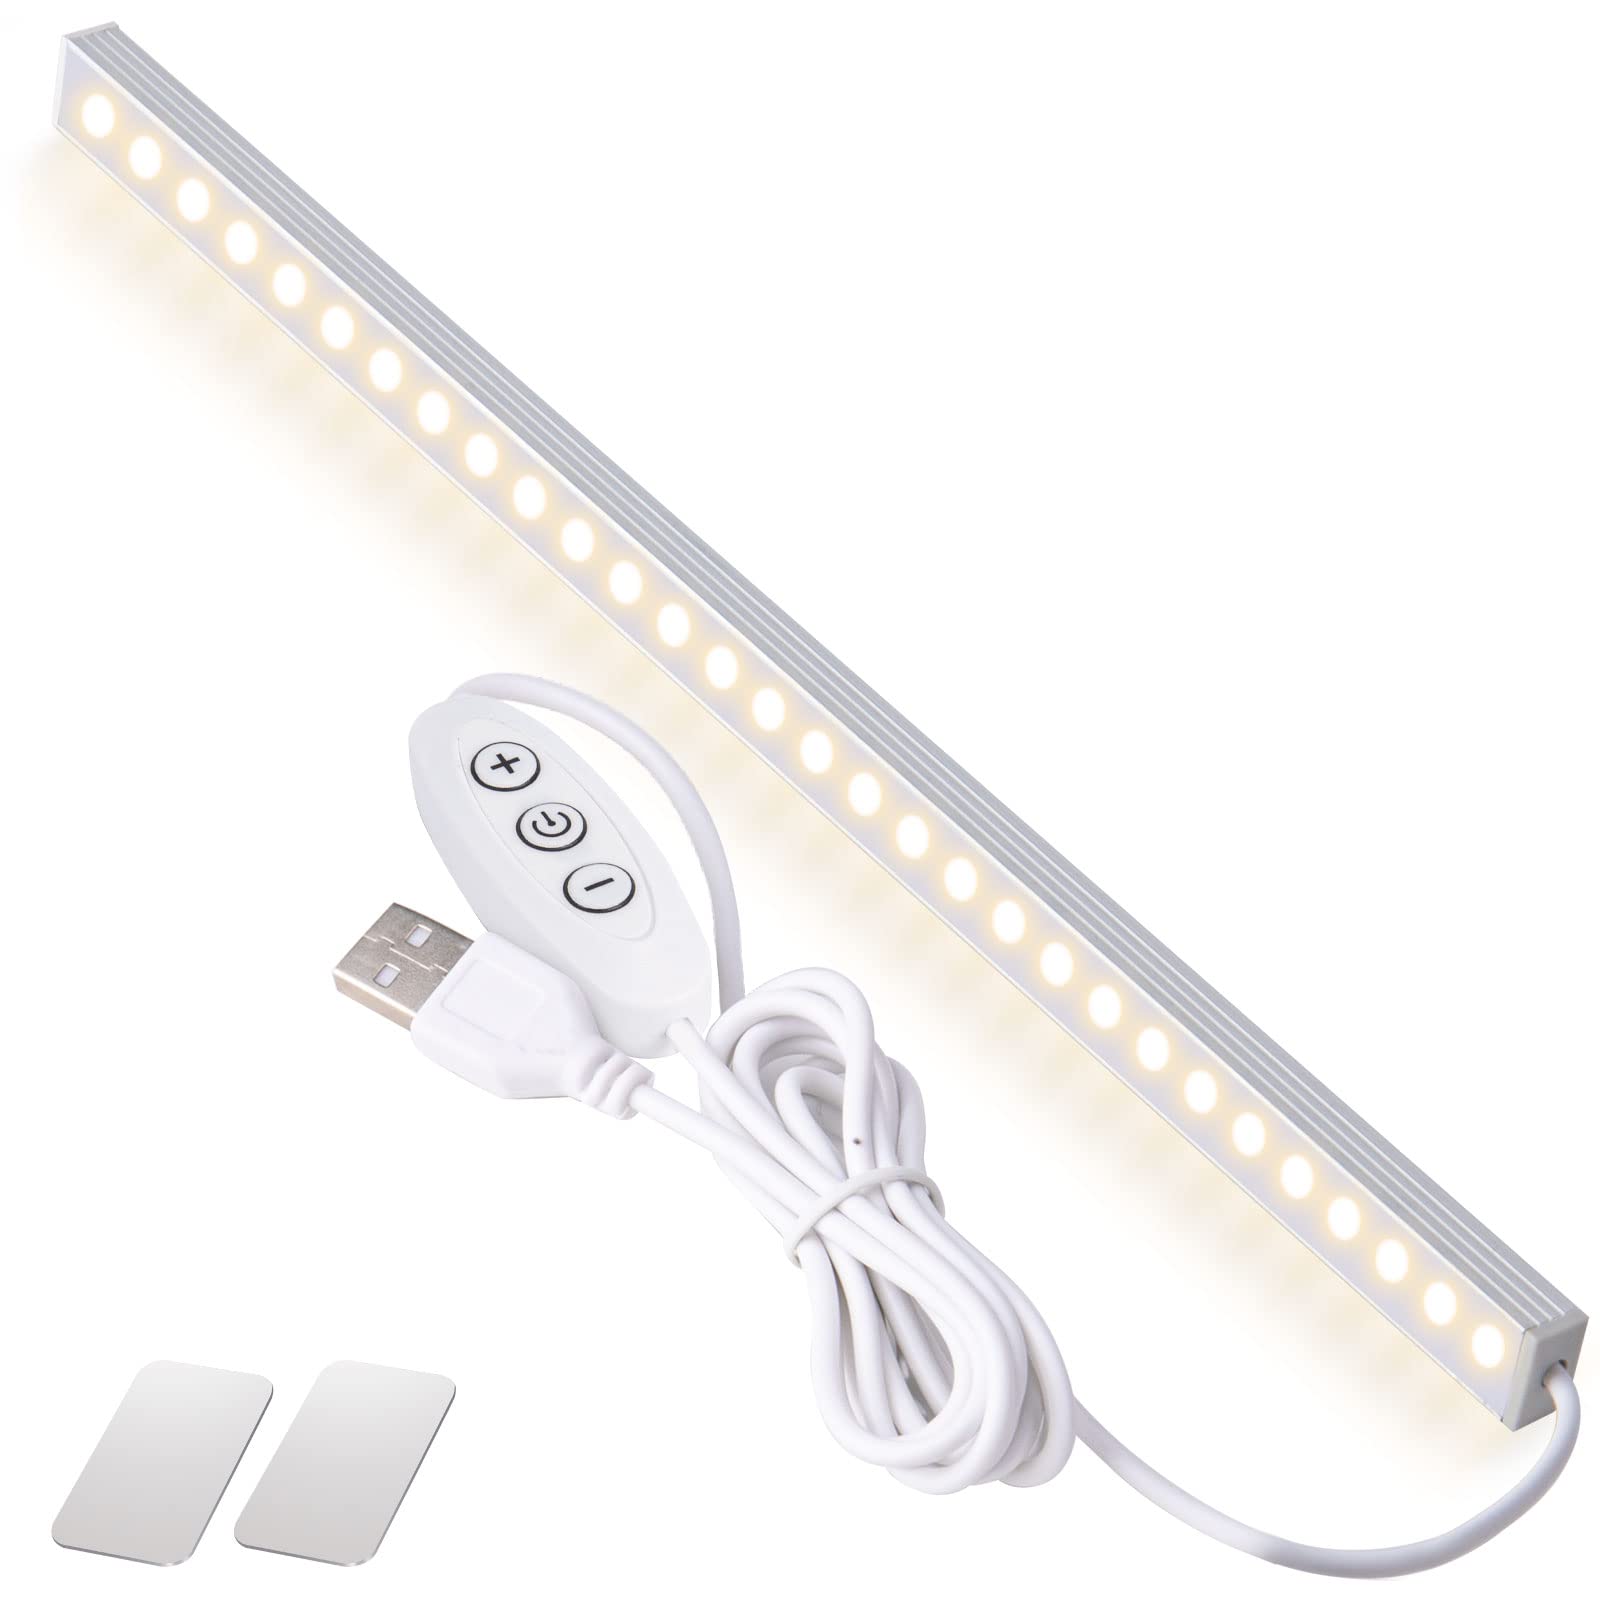 DWEPTU Under Cabinet Light Closet Lights Dimmable LED Stick on Lights Under Counter Light Fixtures with USB Powered LED Light Bar for Room Under Counter Lighting Work Tables Student Dormitory